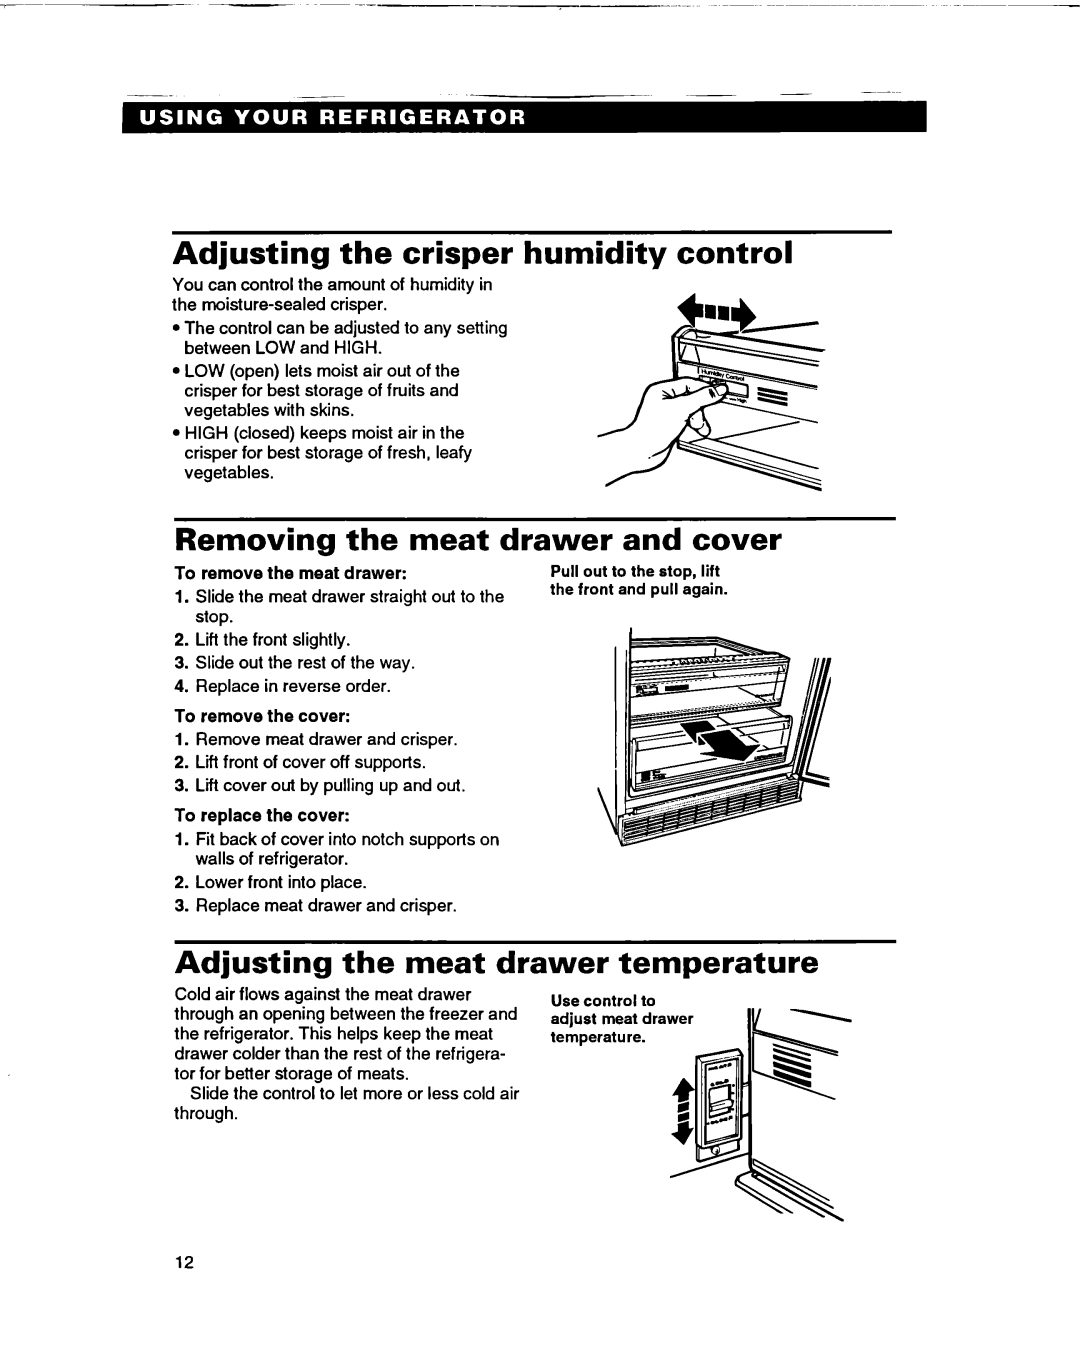 Whirlpool ED22DF warranty Adjusting the crisper humidity control, Removing the meat drawer and cover 